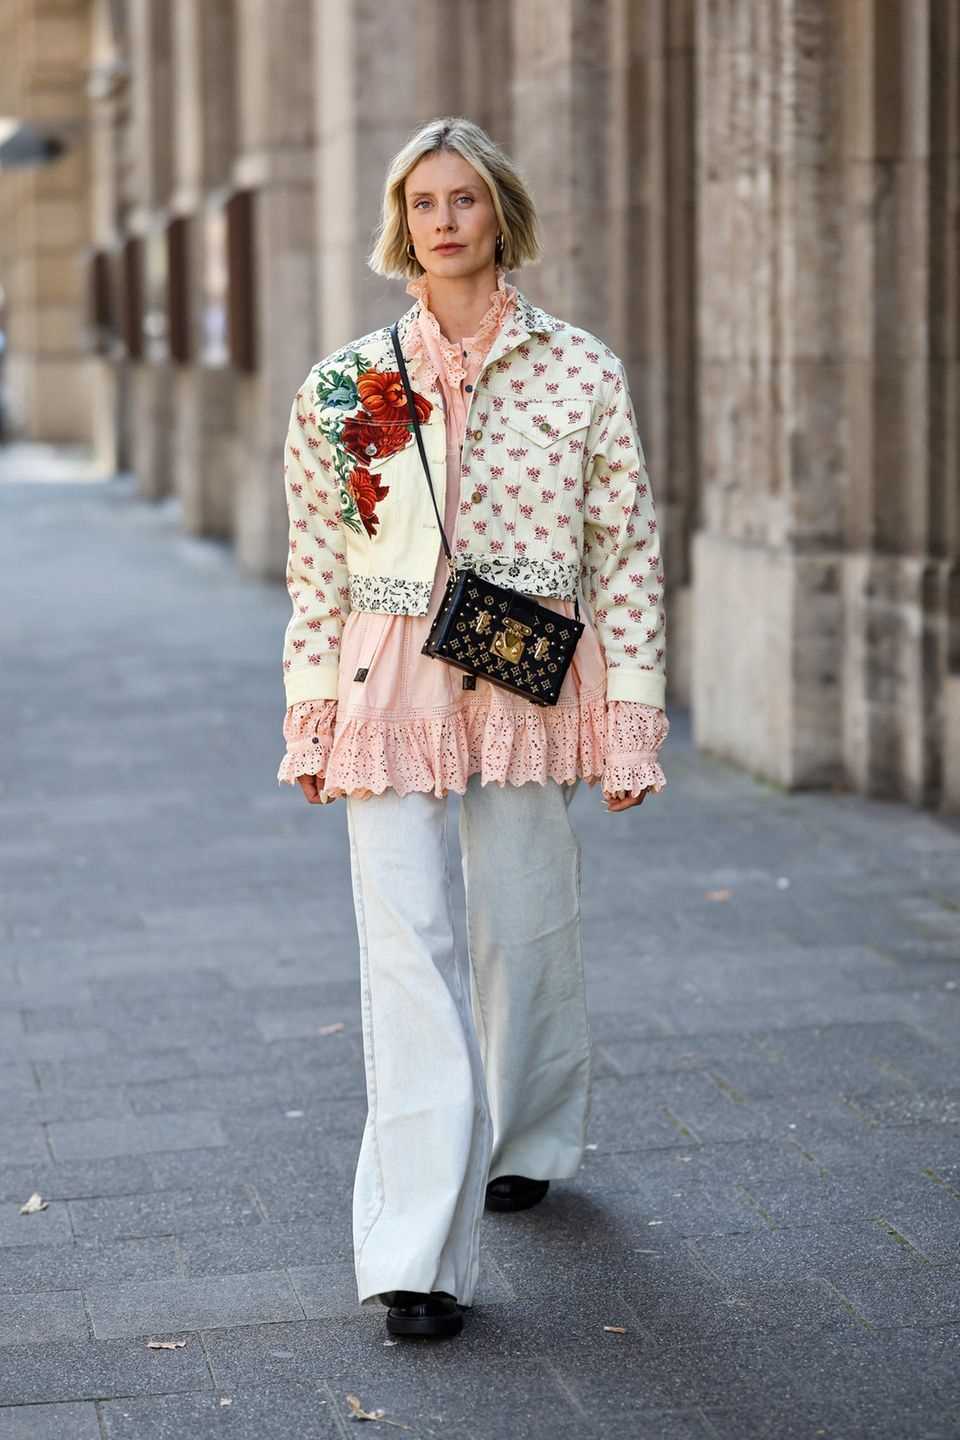 Floral jacket: woman wears a short jacket with a floral pattern